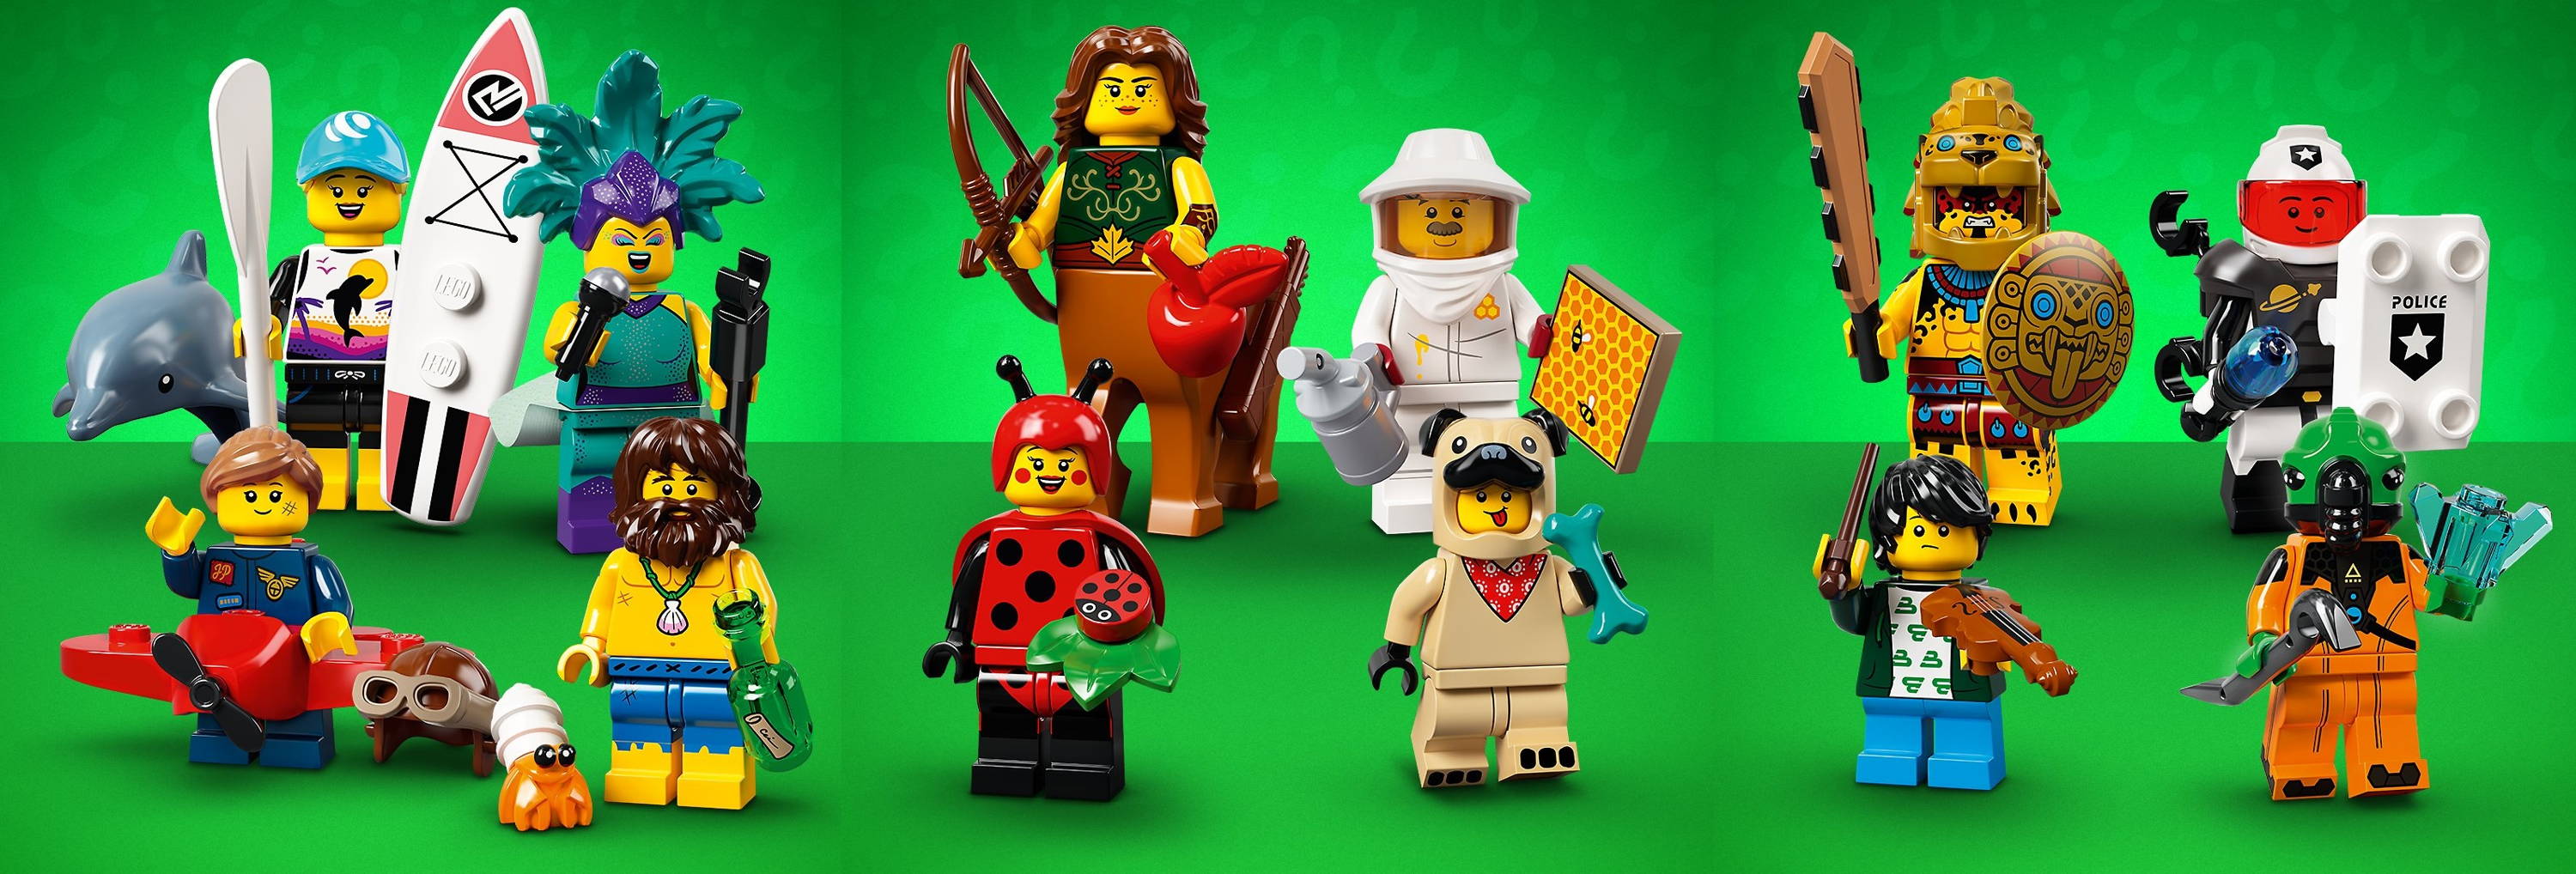 List of Actors that have nine Minifigures: Dee Bradley Baker – Sandman (Marvel Super Heroes), Gregor (Star Wars), Tick Tock Croc (Jake and the Never Land Pirates), Thi-Sen (Star Wars), Onaconda Farr (Star Wars), Commander Gree (Star Wars), Saesee Tiin (Star Wars), Commander Wolffe (Star Wars), Commander Fox (Star Wars), Commander Cody (Star Wars), Captain Rex (Star Wars), Clone Trooper(s) (Star Wars), Momo (Avatar: The Last Airbender).  Any additions to this list, you should feel free to add them in the comments section. 